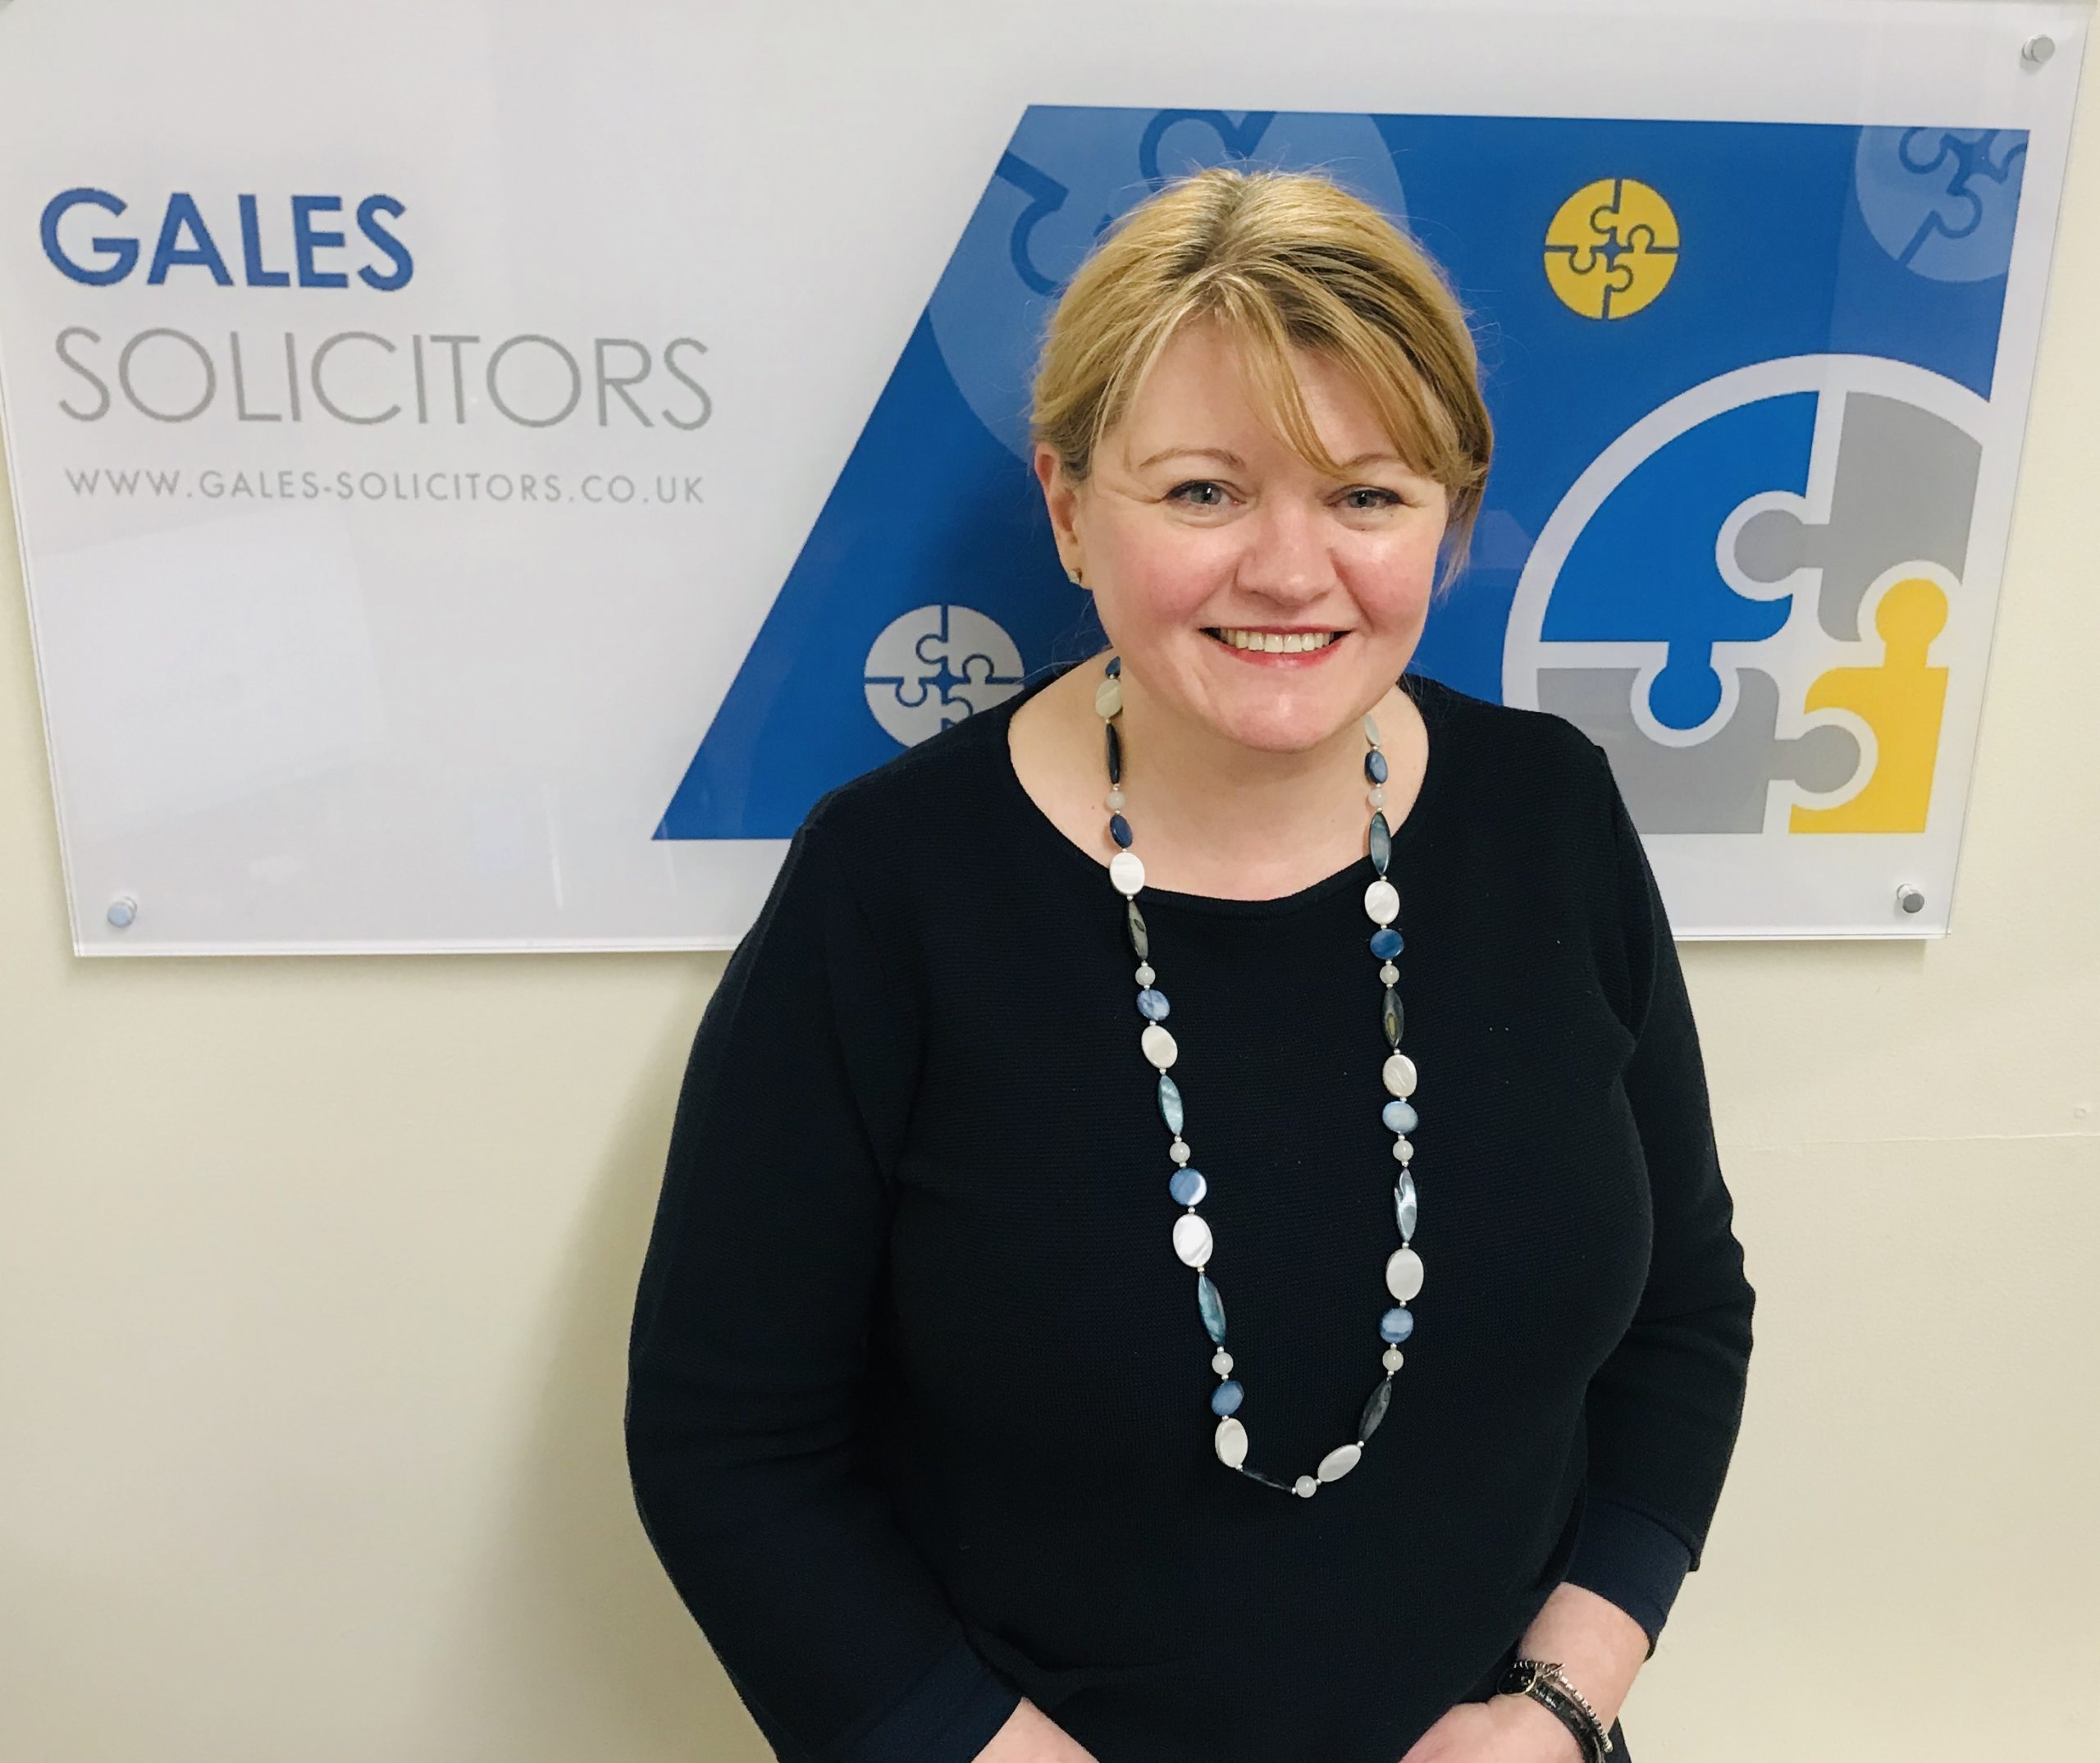 Gales Solicitors welcomes Orla as Head of Conveyancing